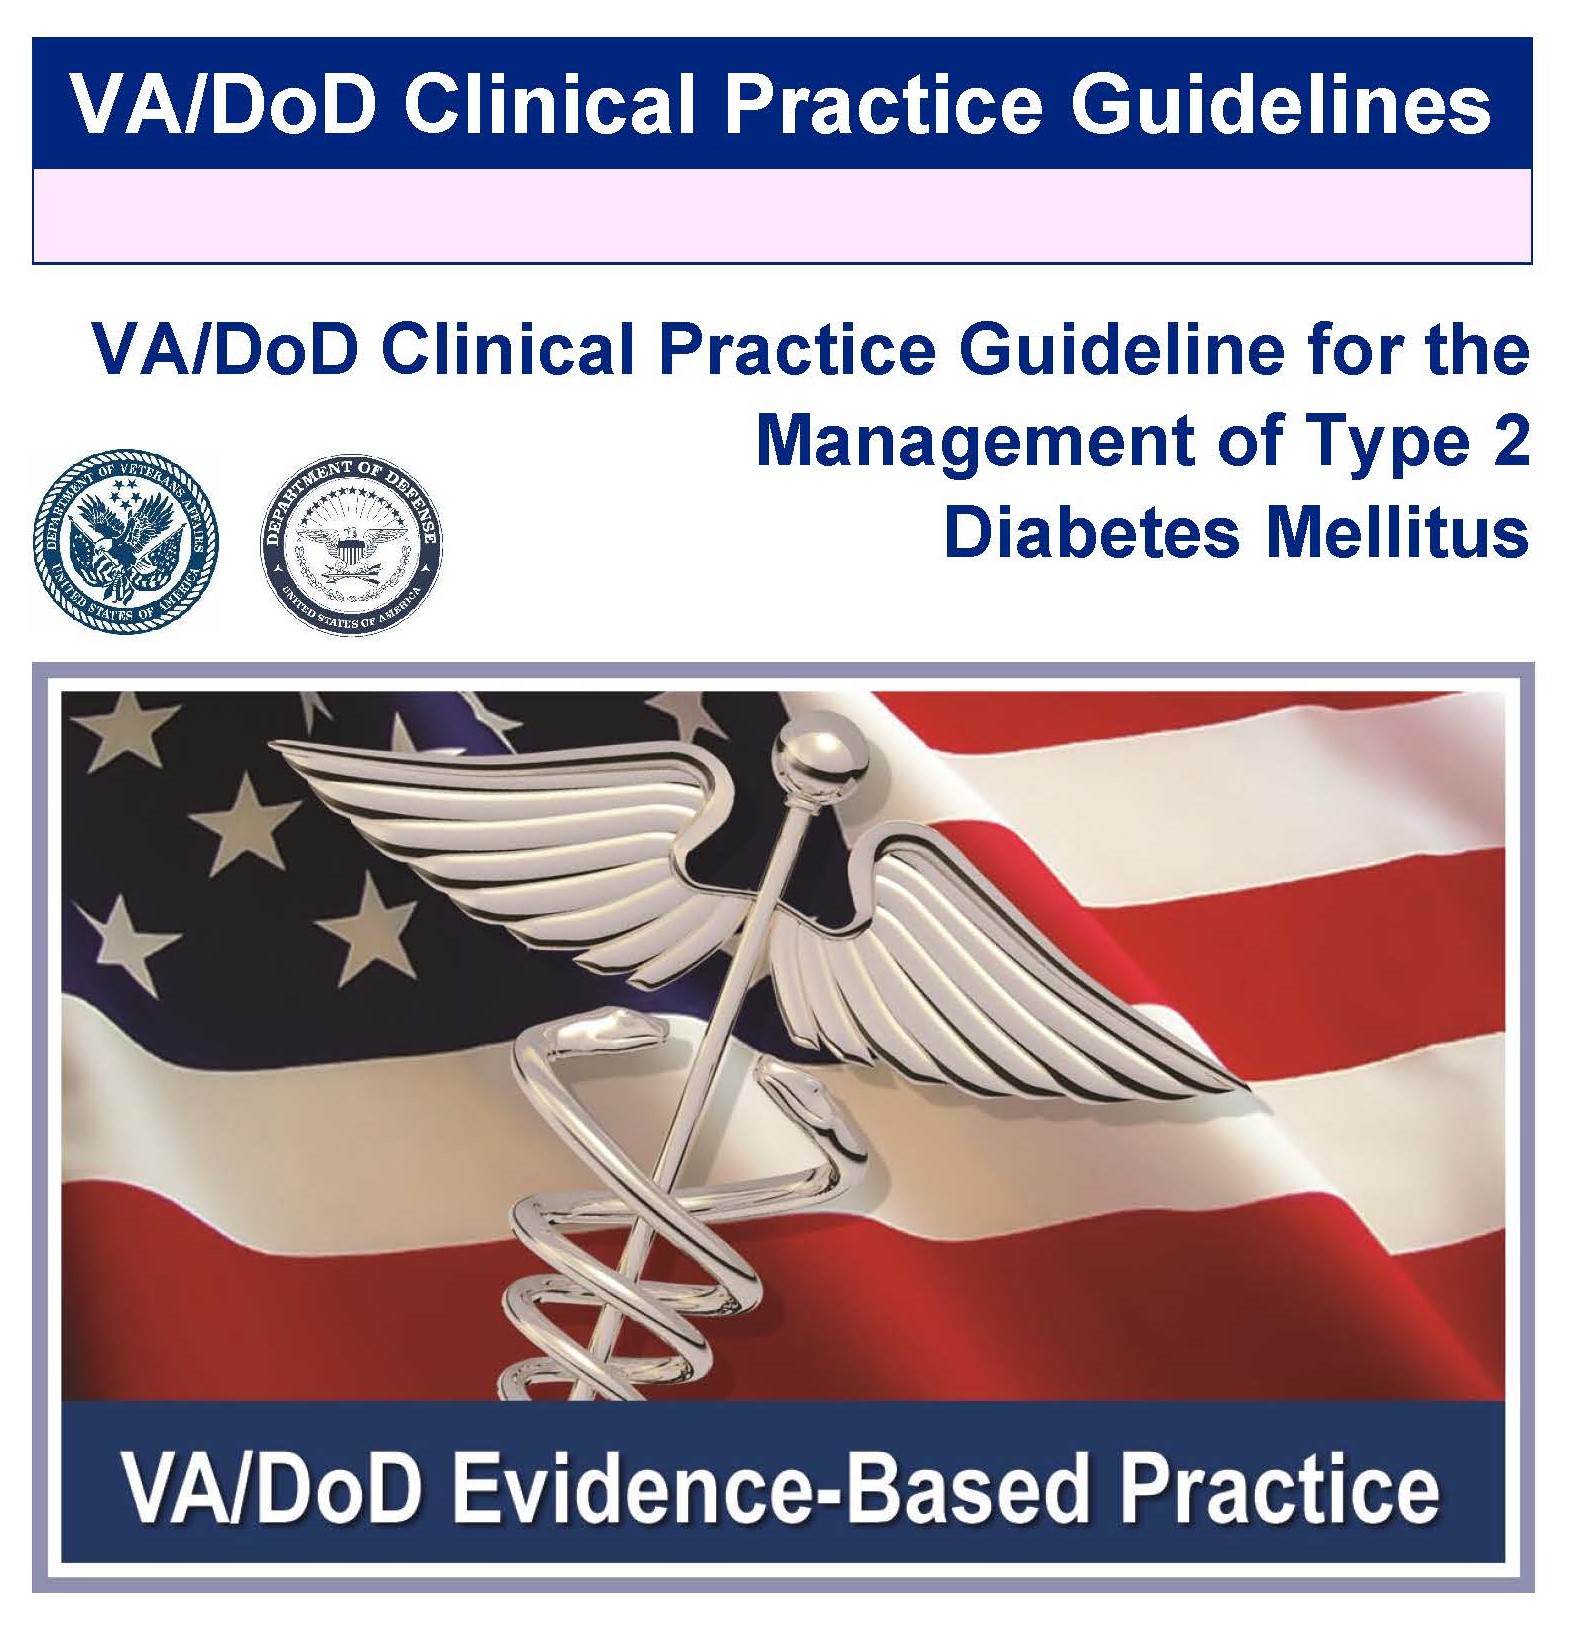 Image of the cover of the VA/DoD Clinical Practice Guideline Management of Diabetes Mellitus